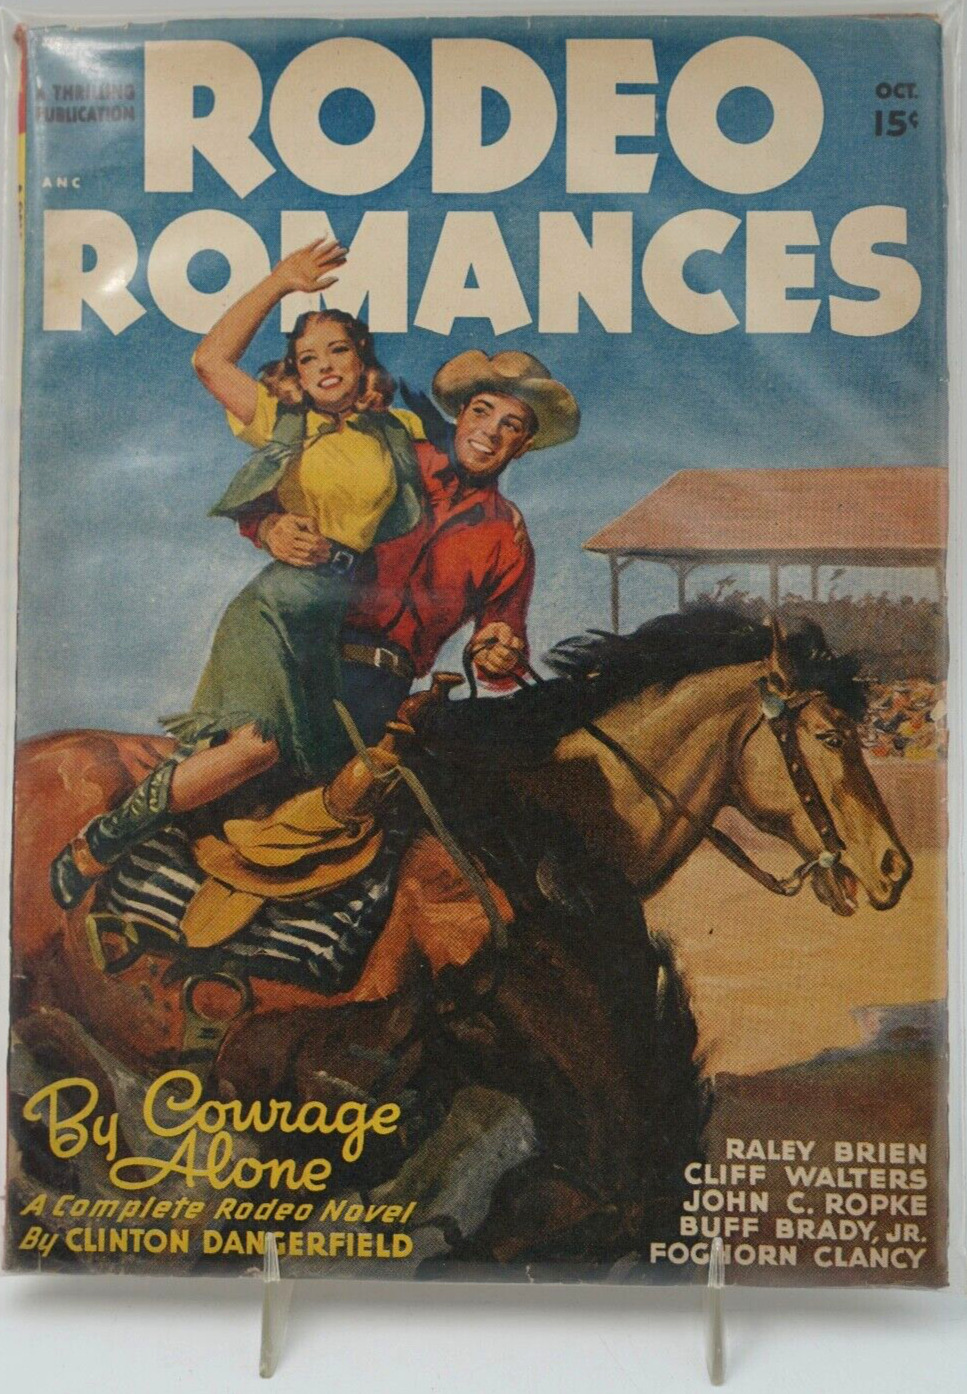 1947 - Rodeo Romances - Western Pulp Art Magazine - By Courage Alone